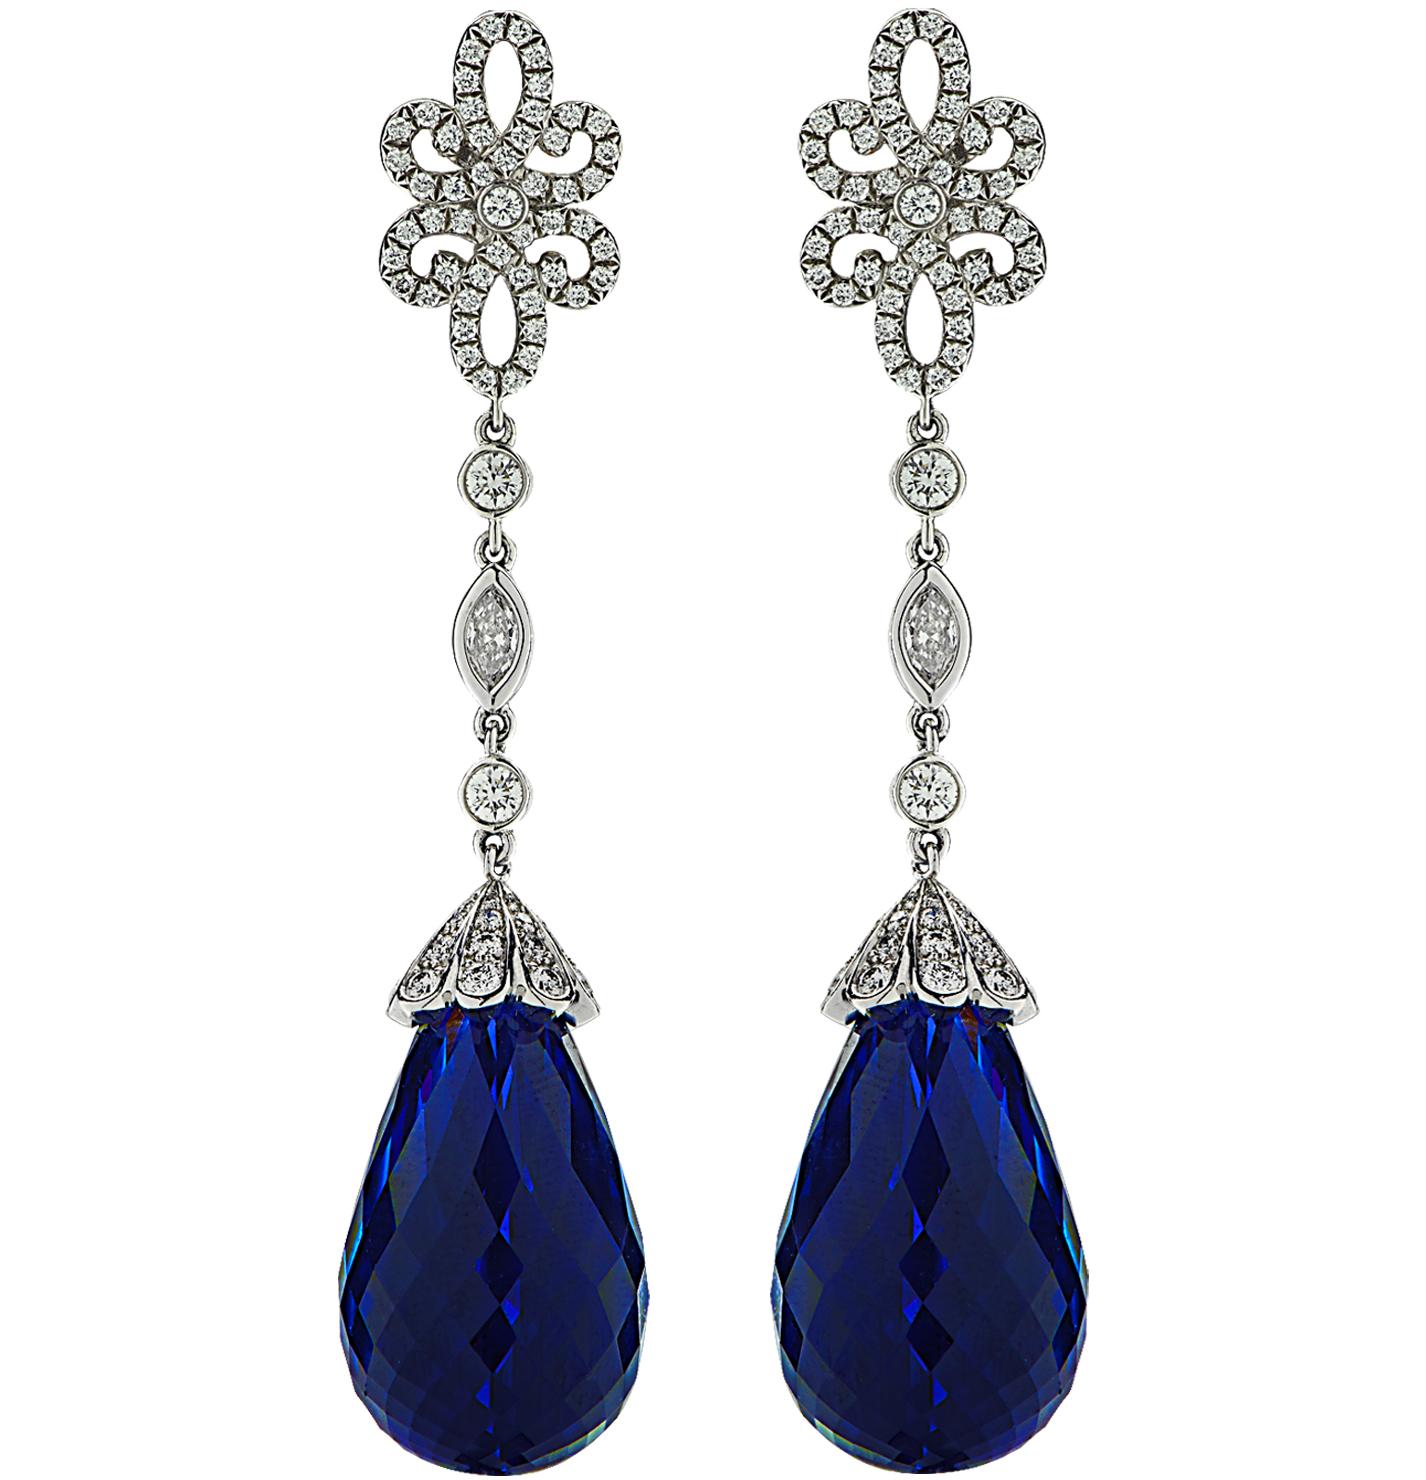 Sensational Tiffany & Co. drop earrings crafted in platinum, showcasing two tanzanite briolette drops weighing 46.84 carats total, round brilliant cut diamonds weighing approximately .99 carats total E-F color, VVS-VS clarity and marquise brilliant